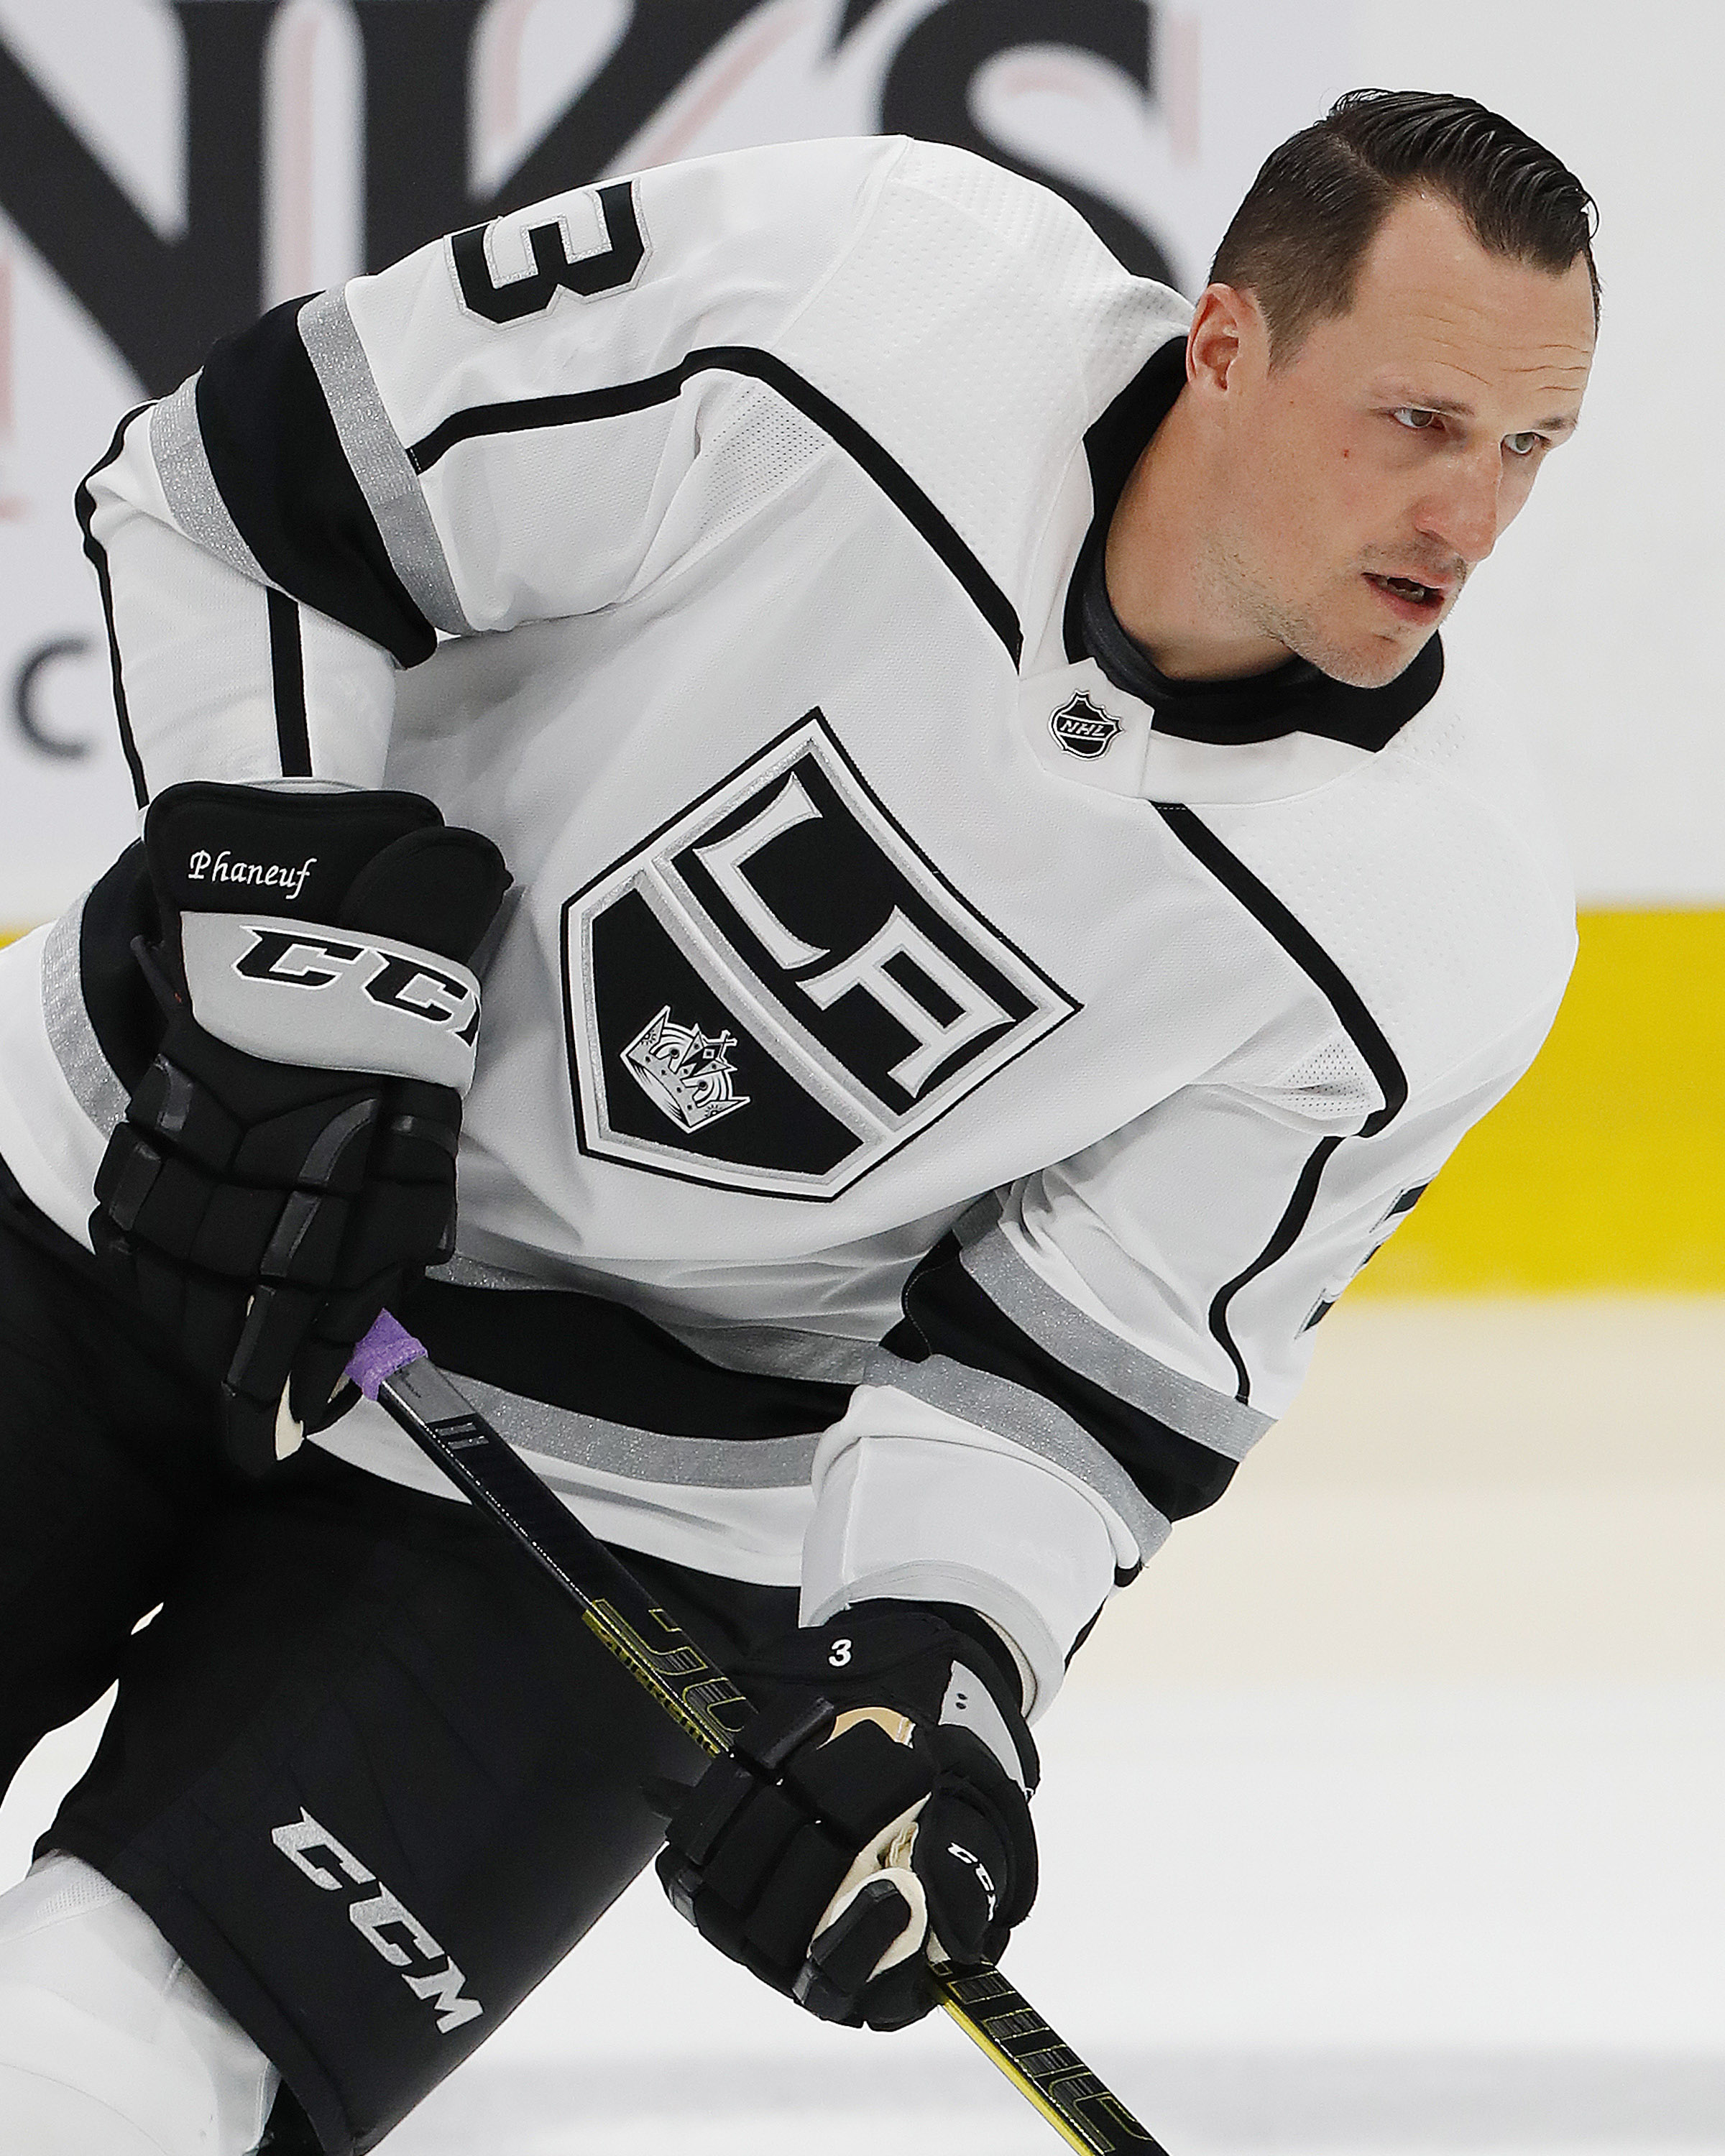 Canadian retired professional ice hockey player Dion phaneuf net worth 